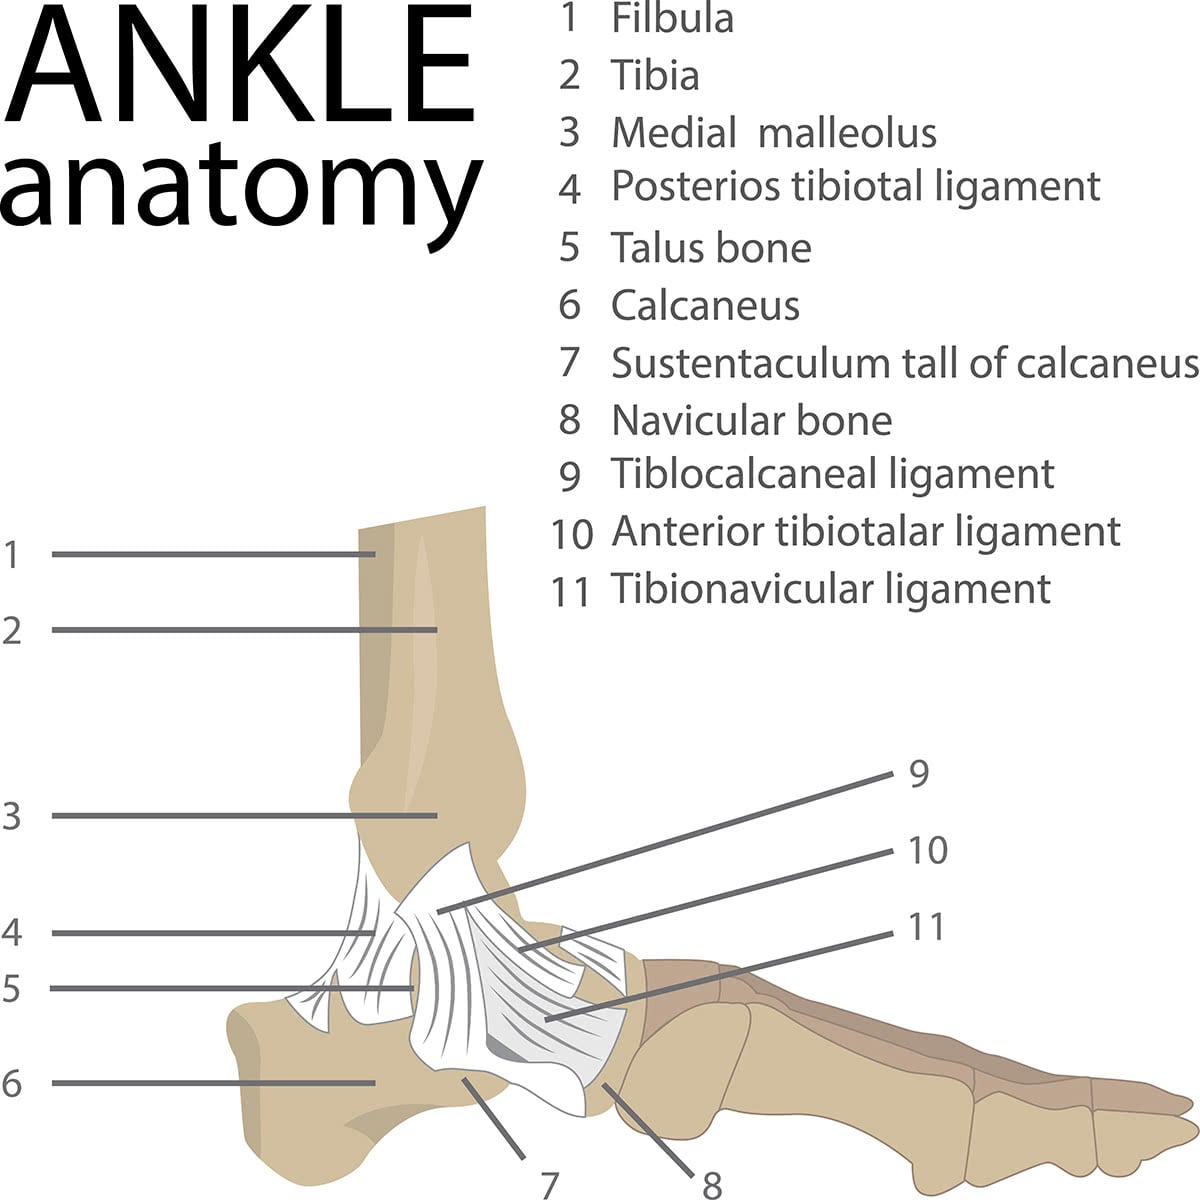 Bones and joints of the ankle complex